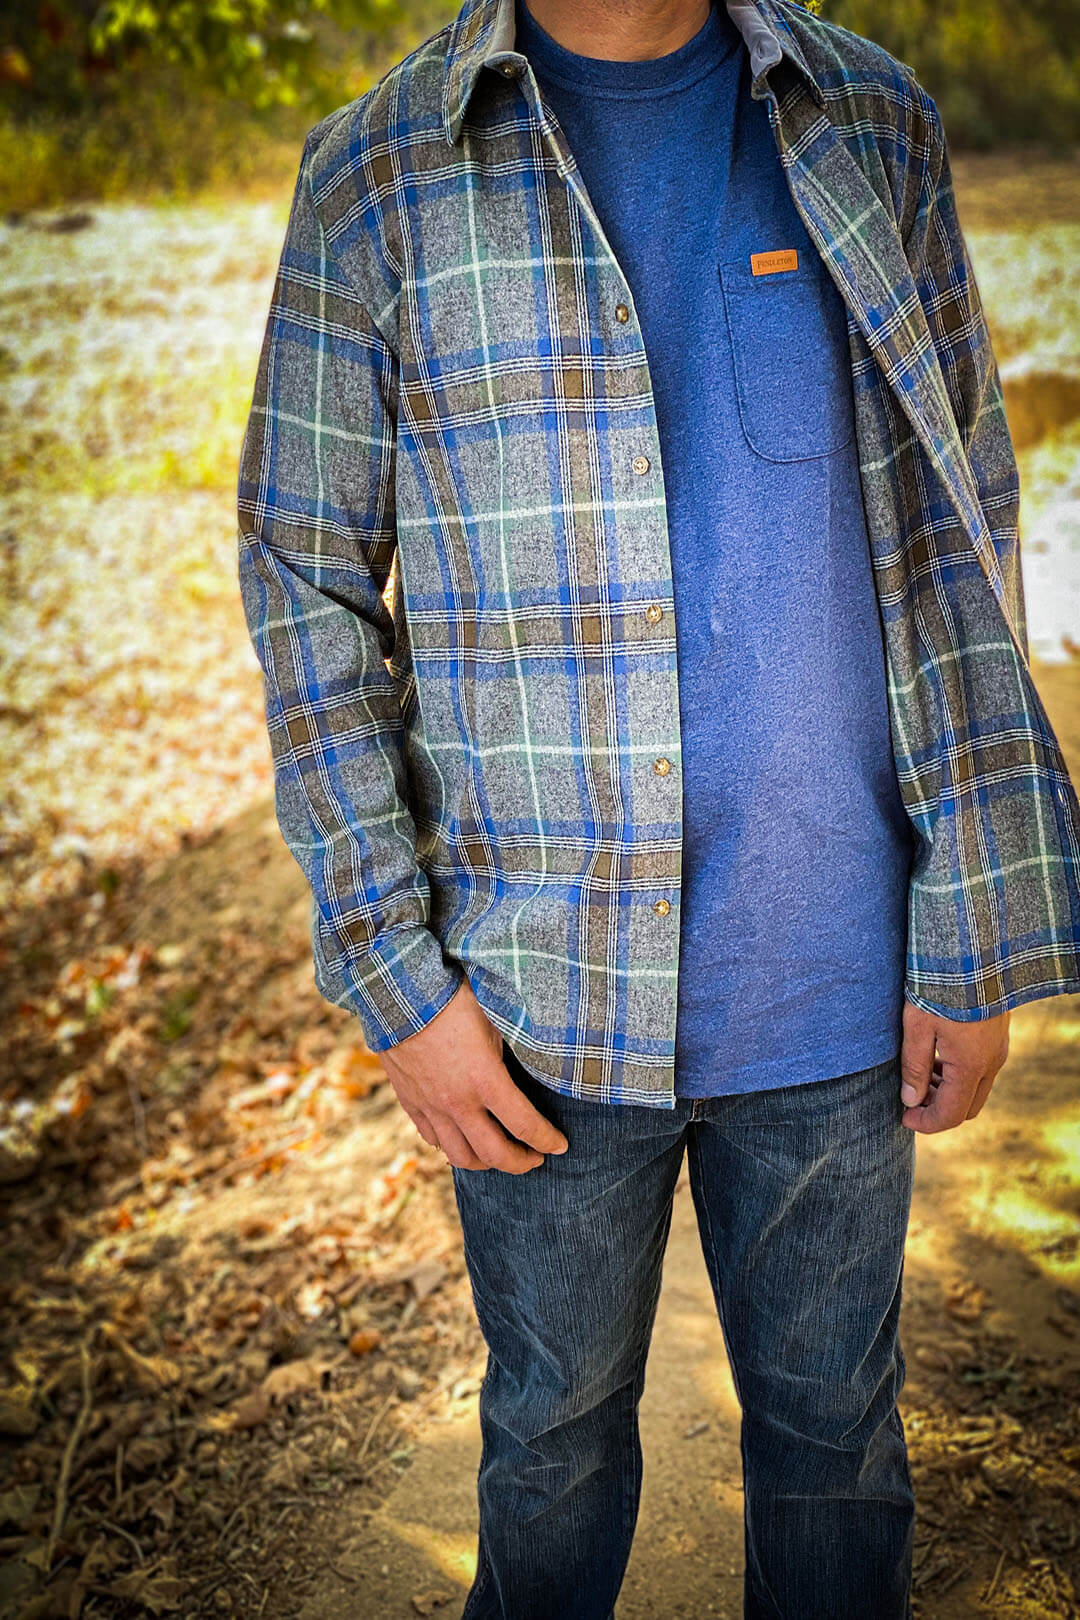 Man wearing Pendleton lodge long sleeve blue, gray striped plaid pattern with button front with blue Pendleton shirt underneath and denim jeans